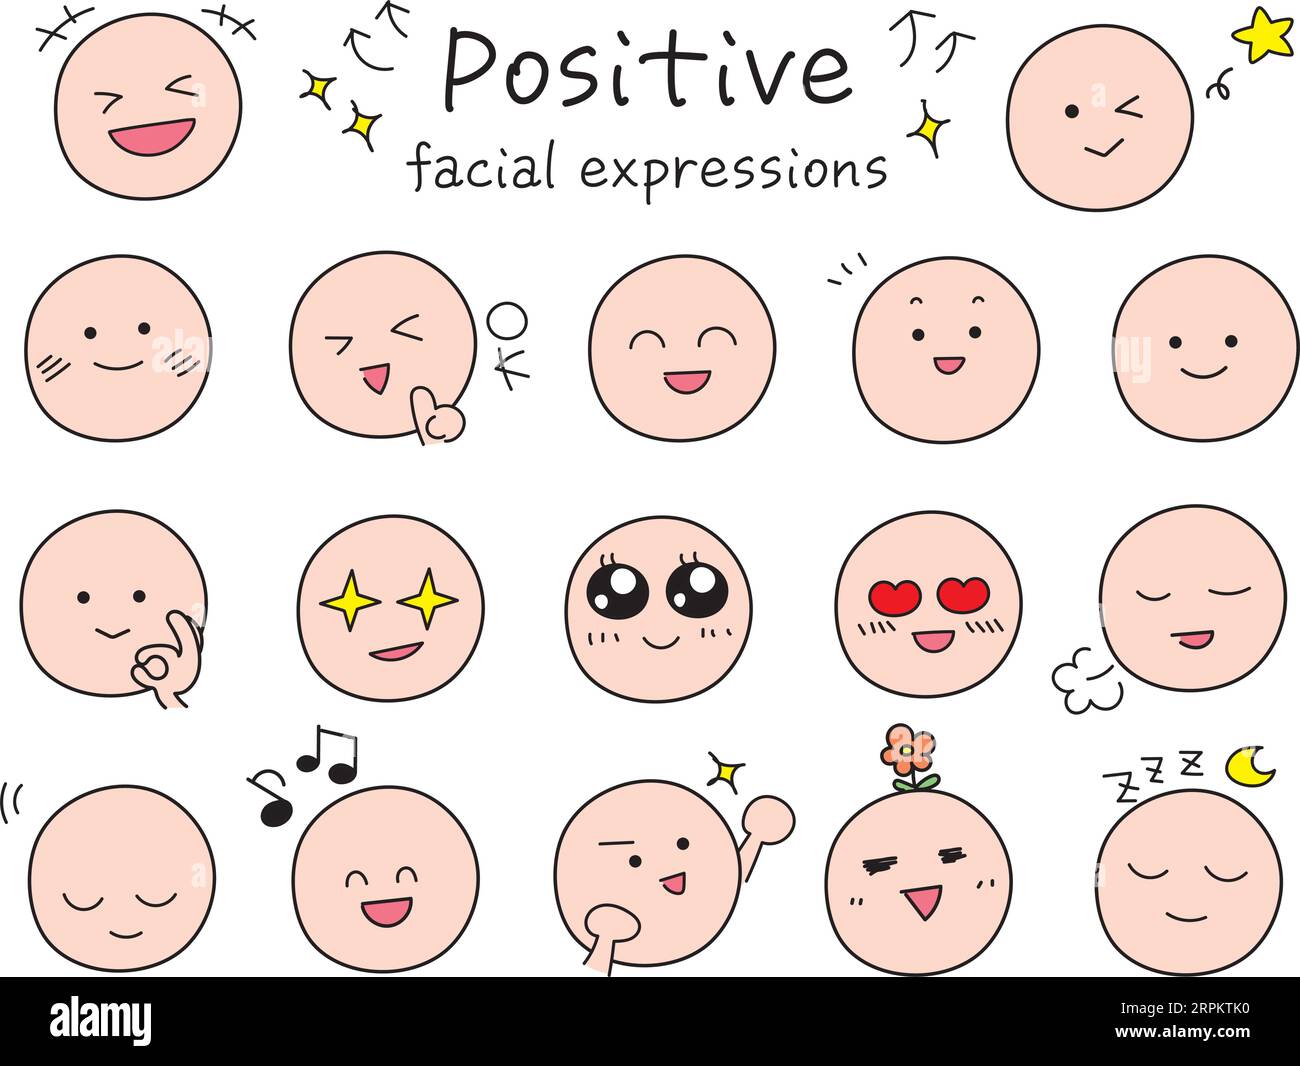 Simple and cute positive facial expression icon set. Color pictogram style illustration.  Collection of funny emojis. Stock Vector